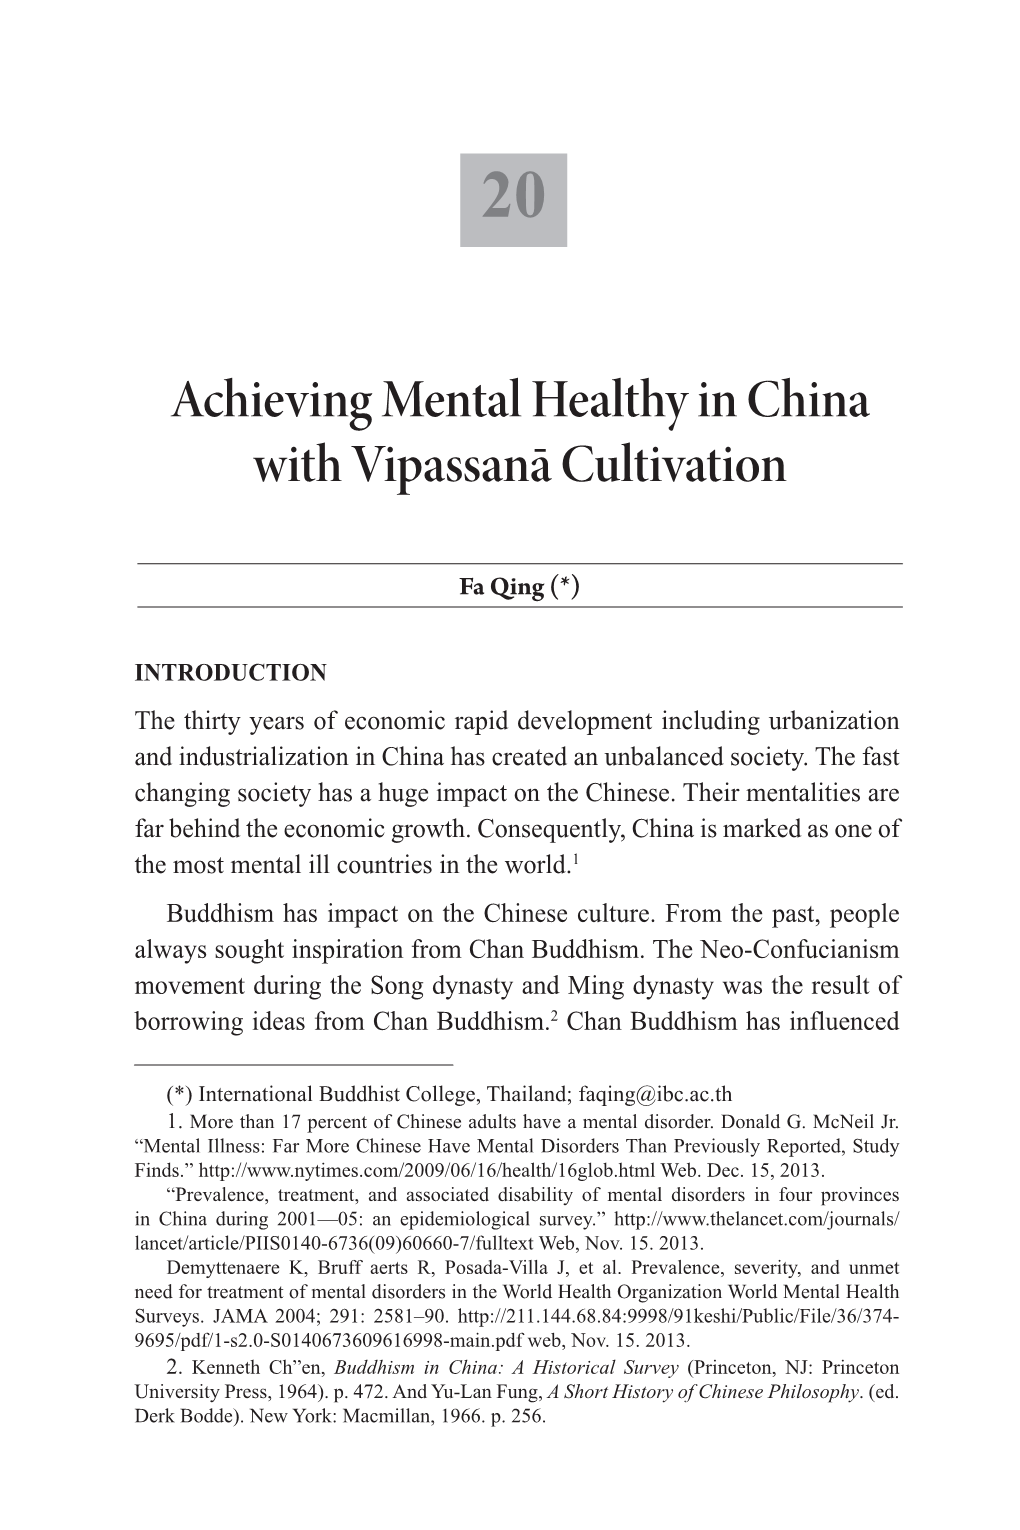 Achieving Mental Healthy in China with Vipassana Cultivation